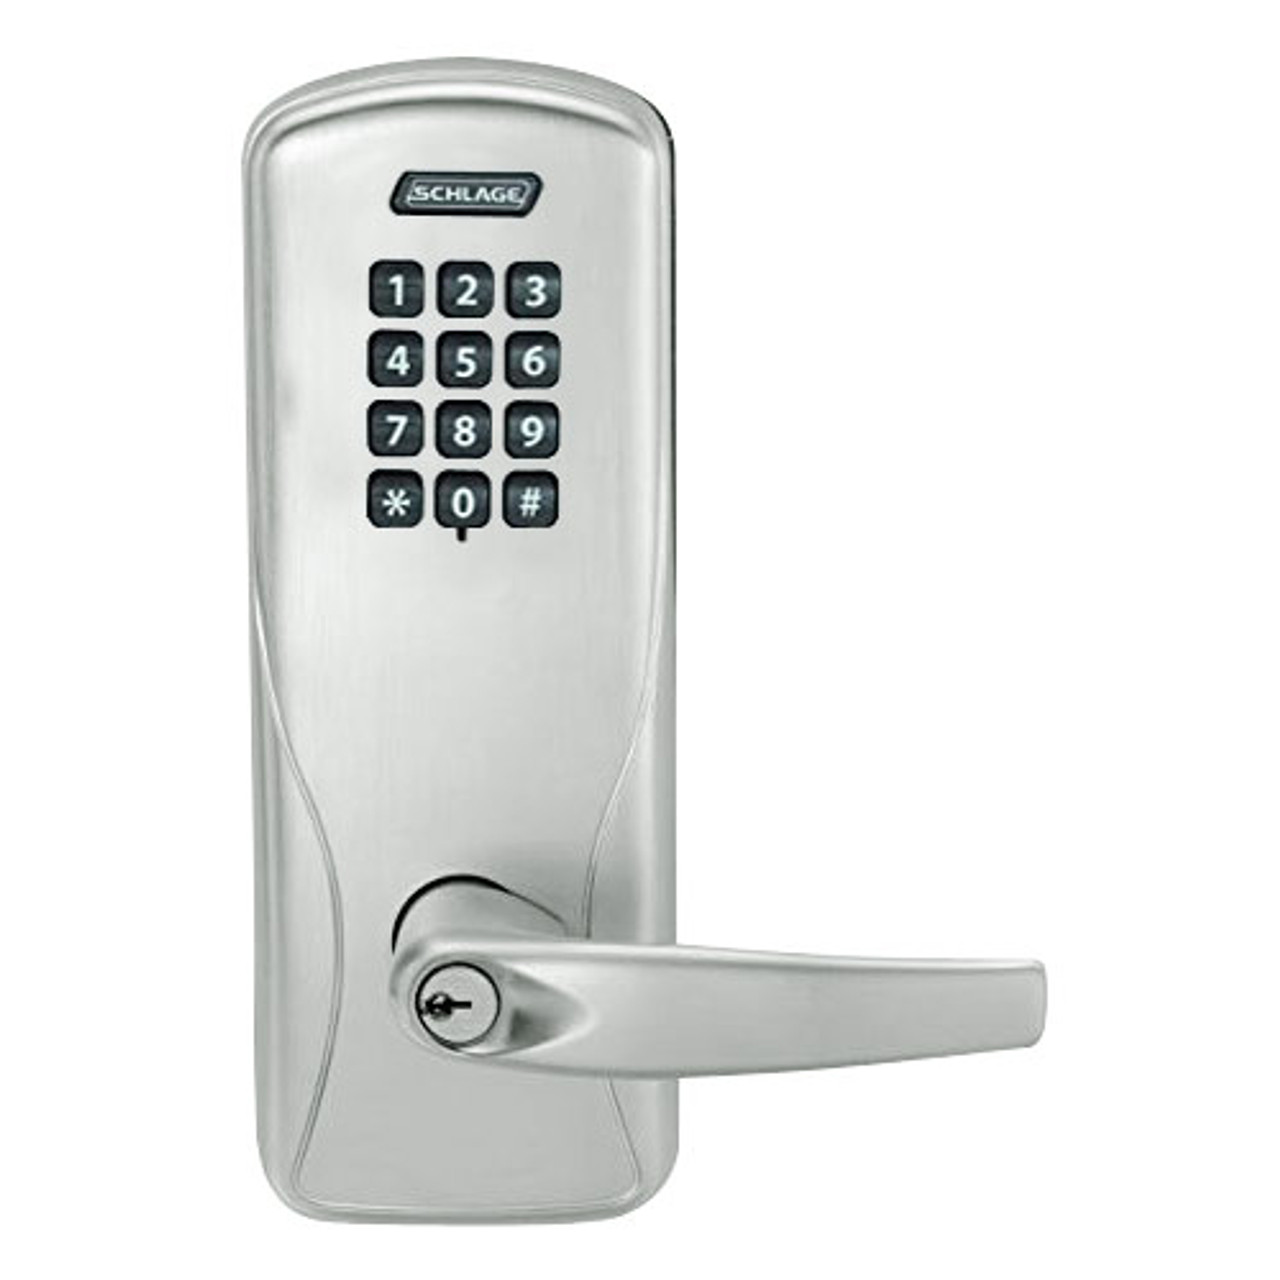 CO100-MS-50-KP-ATH-PD-619 Schlage Standalone Mortise Electronic Keypad locks in Satin Nickel